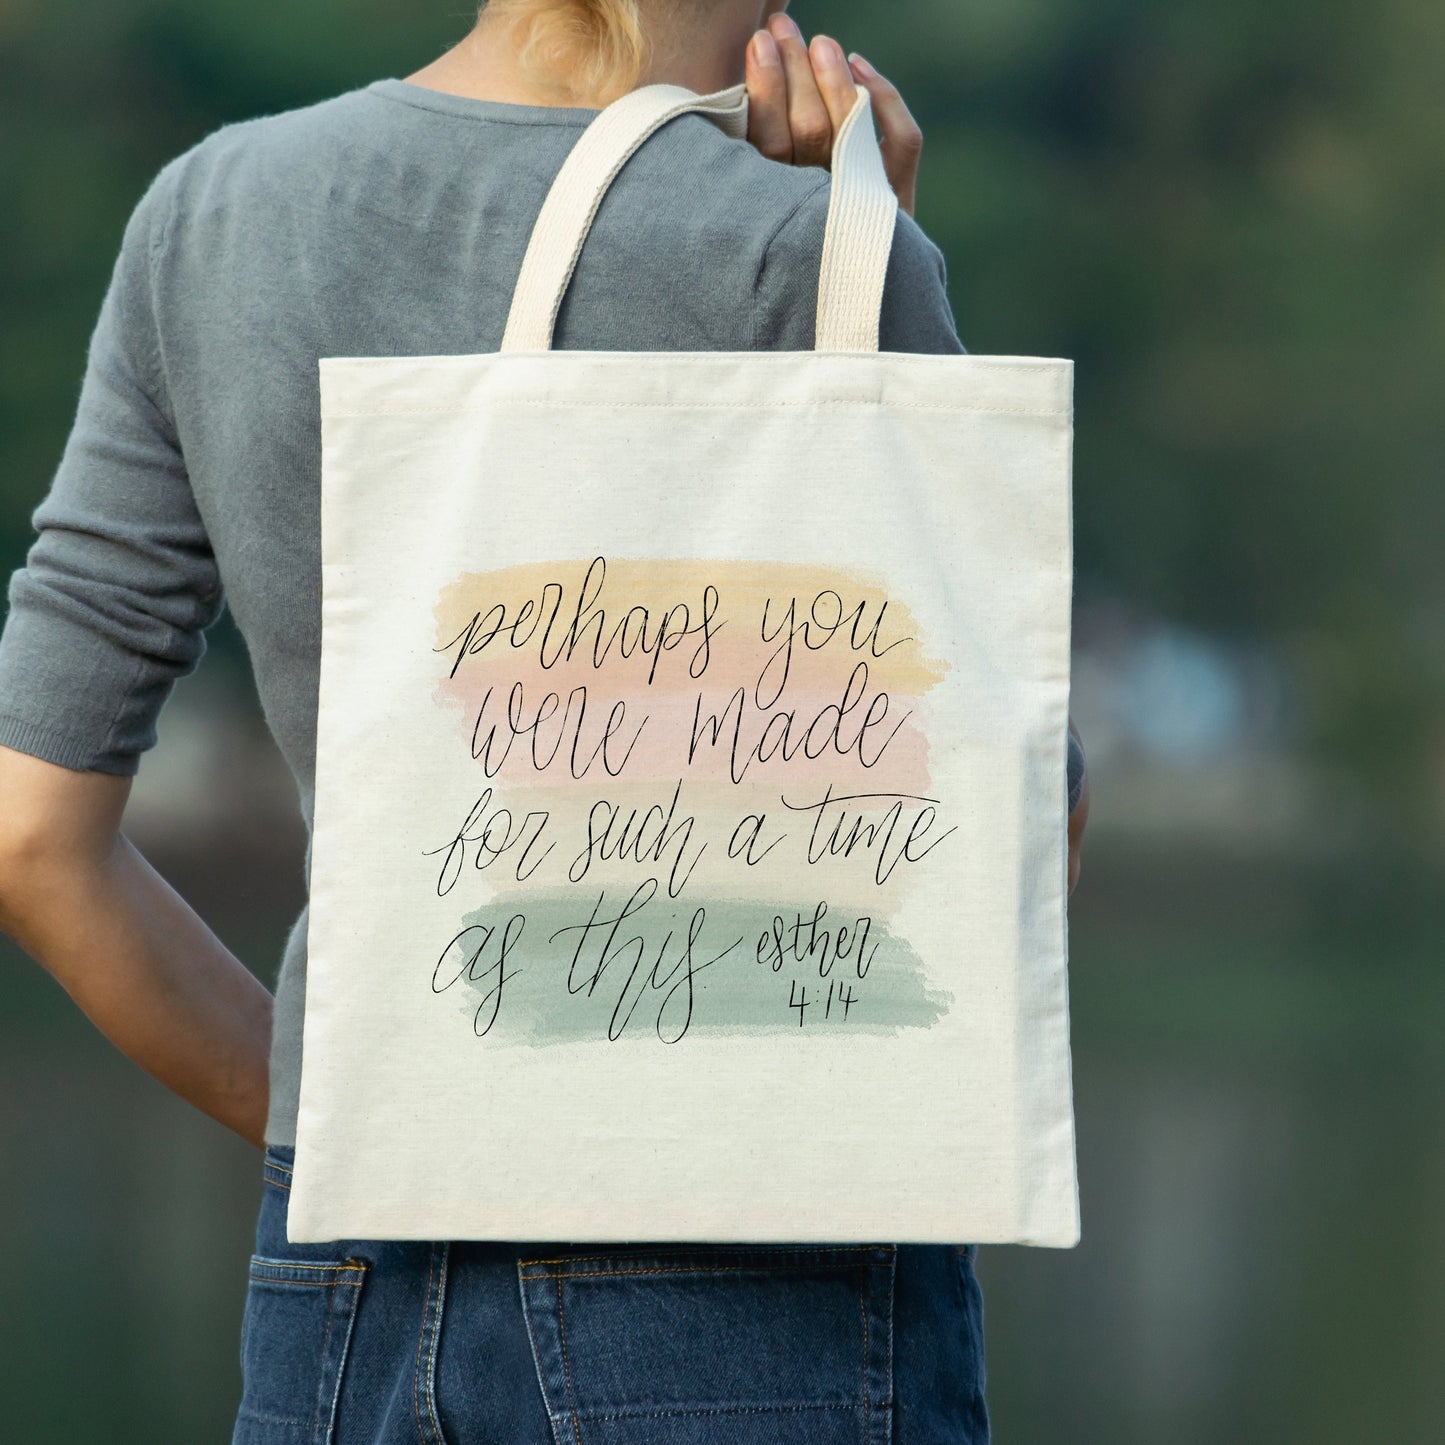 Such A Time Esther 4:14 Tote Bag